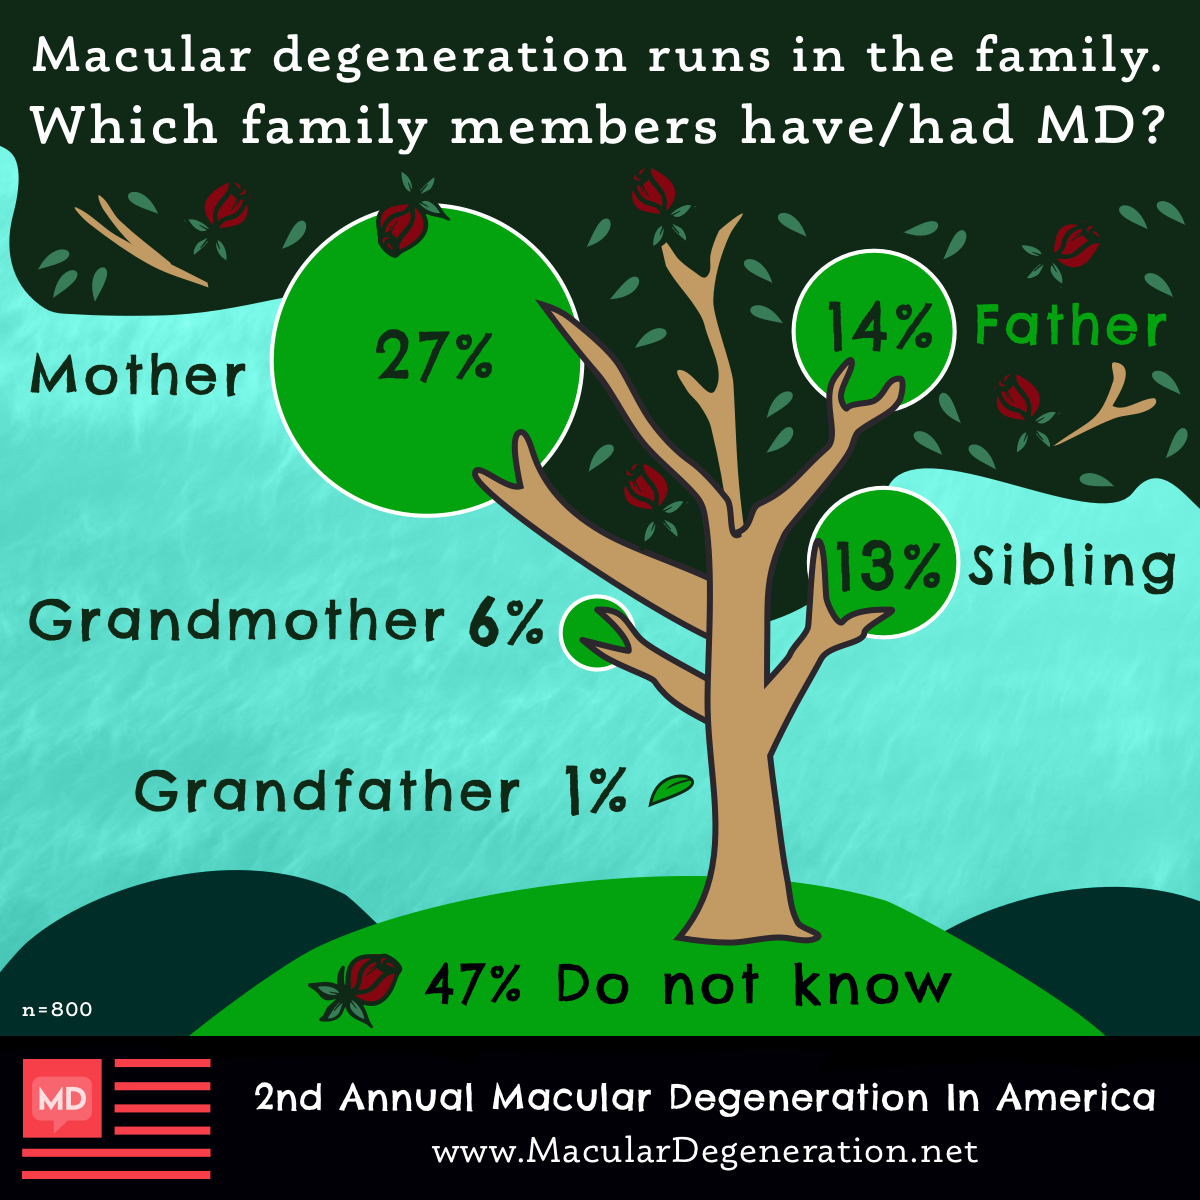 27% of respondents of the macular degeneration In America survey said that their mother had macular degeneration while 14% said that their father had it